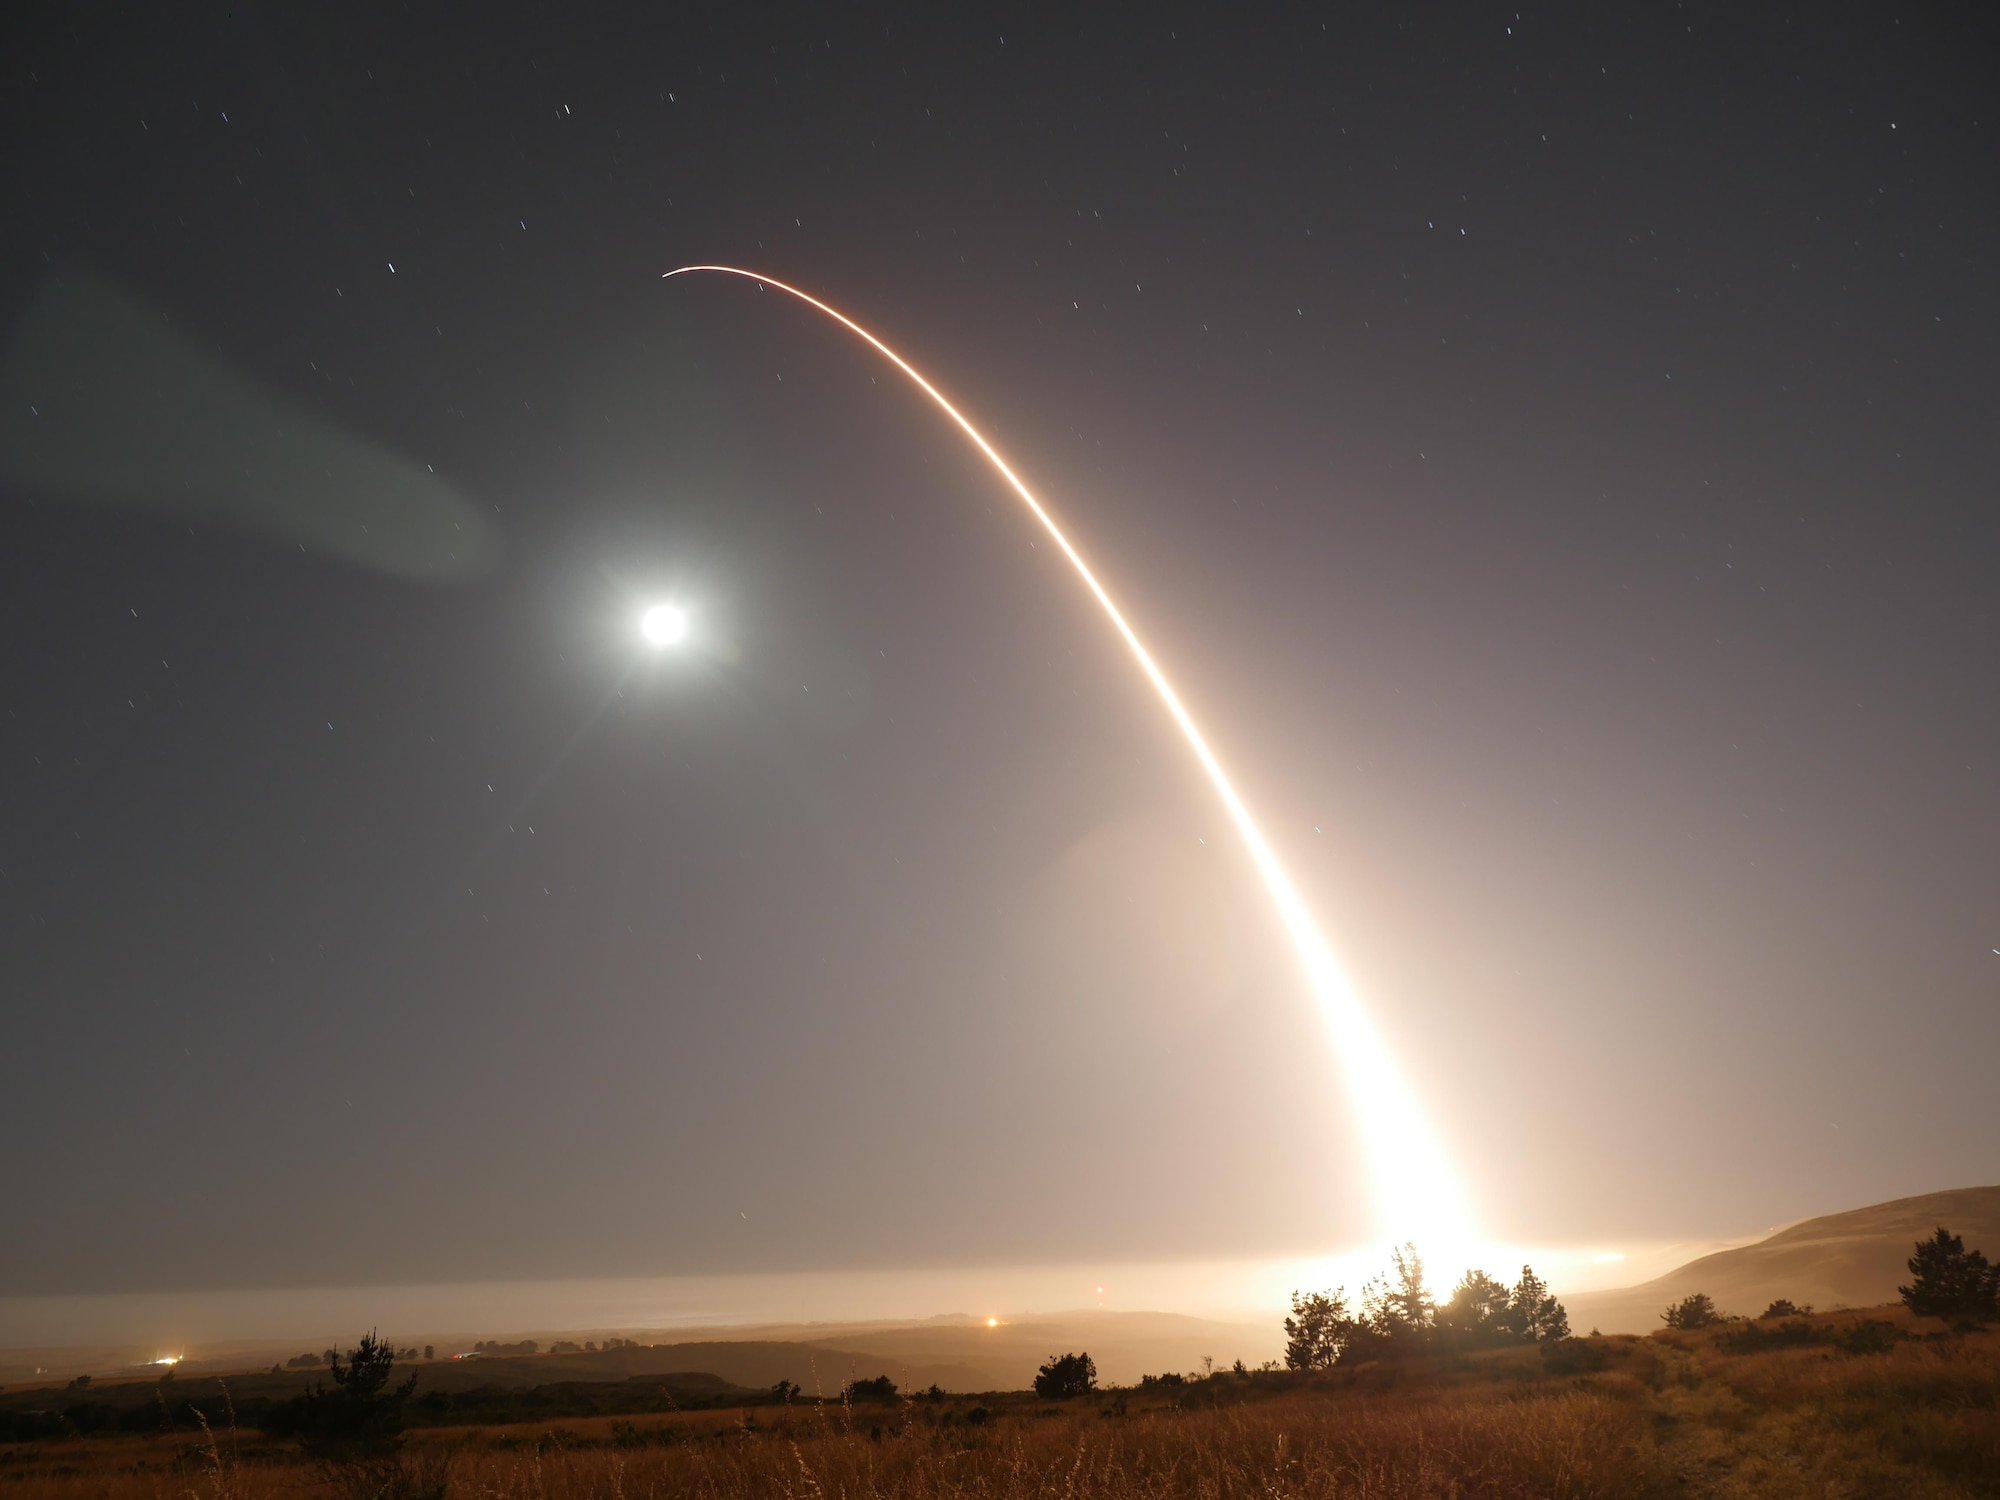 An unarmed Minuteman III intercontinental ballistic missile launches during an operational test at 12:02 a.m. Pacific Daylight Time May 3, 2017, at Vandenberg Air Force Base, Calif. (U.S. Air Force photo/2nd Lt. William Collette)